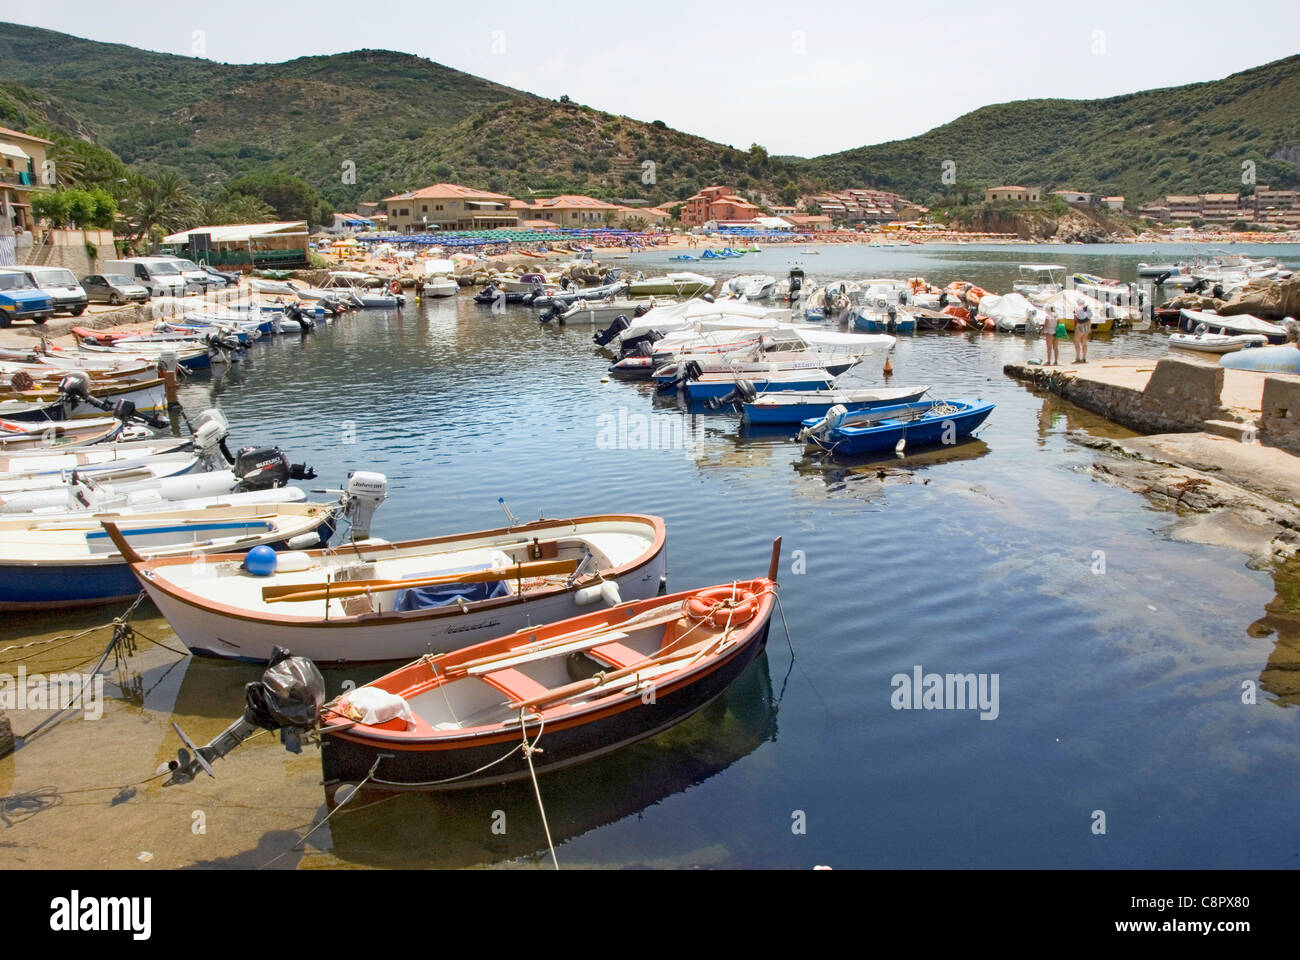 Italy, Isola del Giglio, Giglio Campese, moored boats Stock Photo